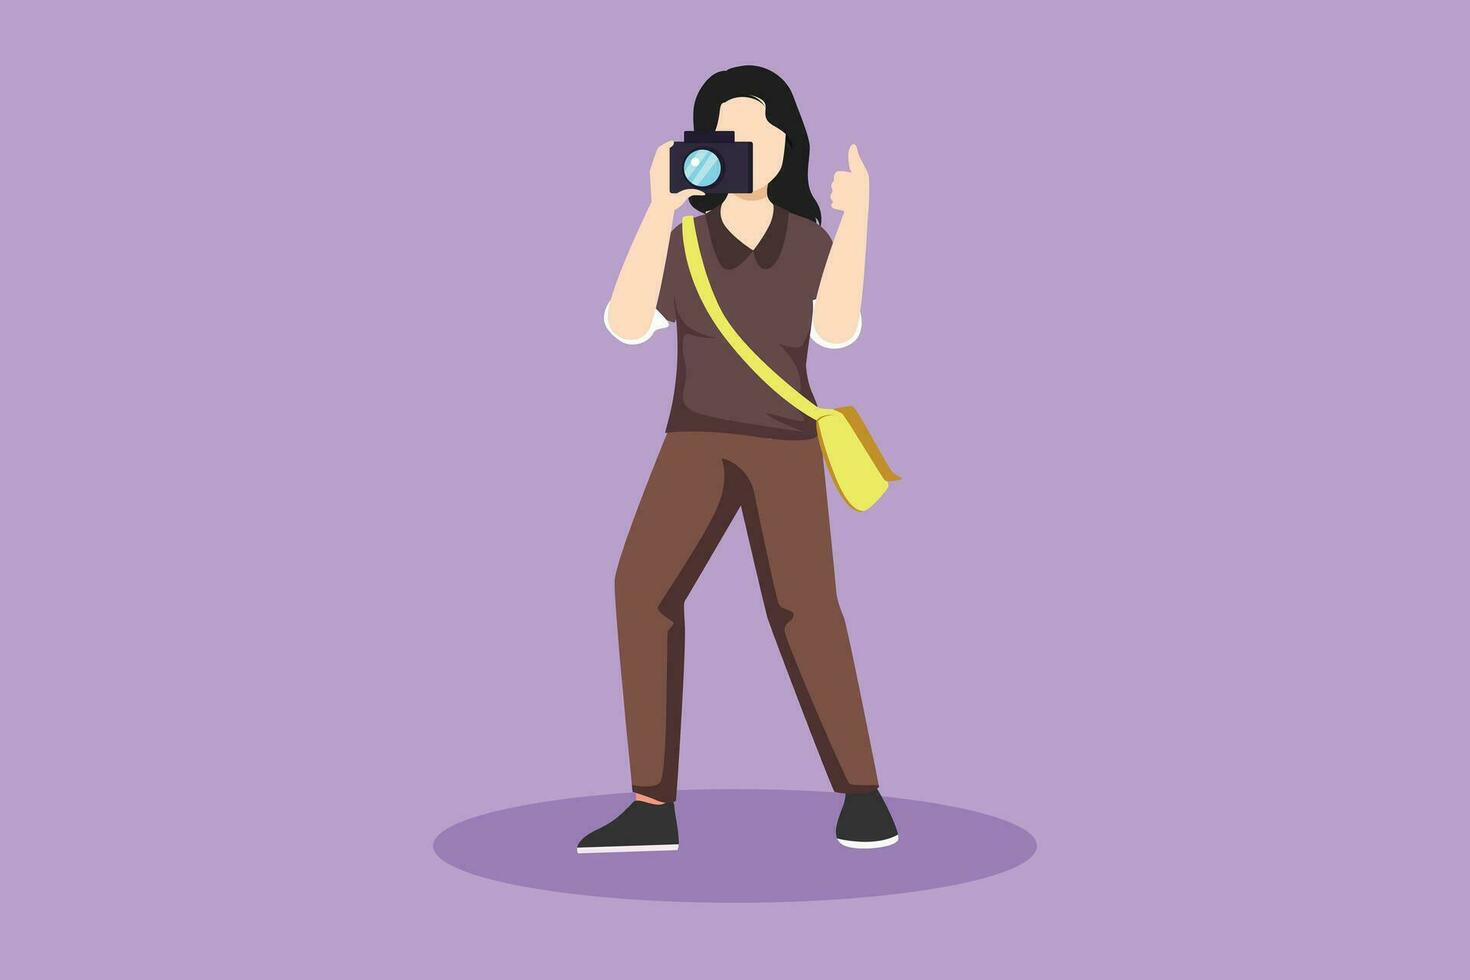 Graphic flat design drawing beautiful woman photographer standing with thumbs up gesture, holding photo camera and photographing. Creative profession or occupation. Cartoon style vector illustration